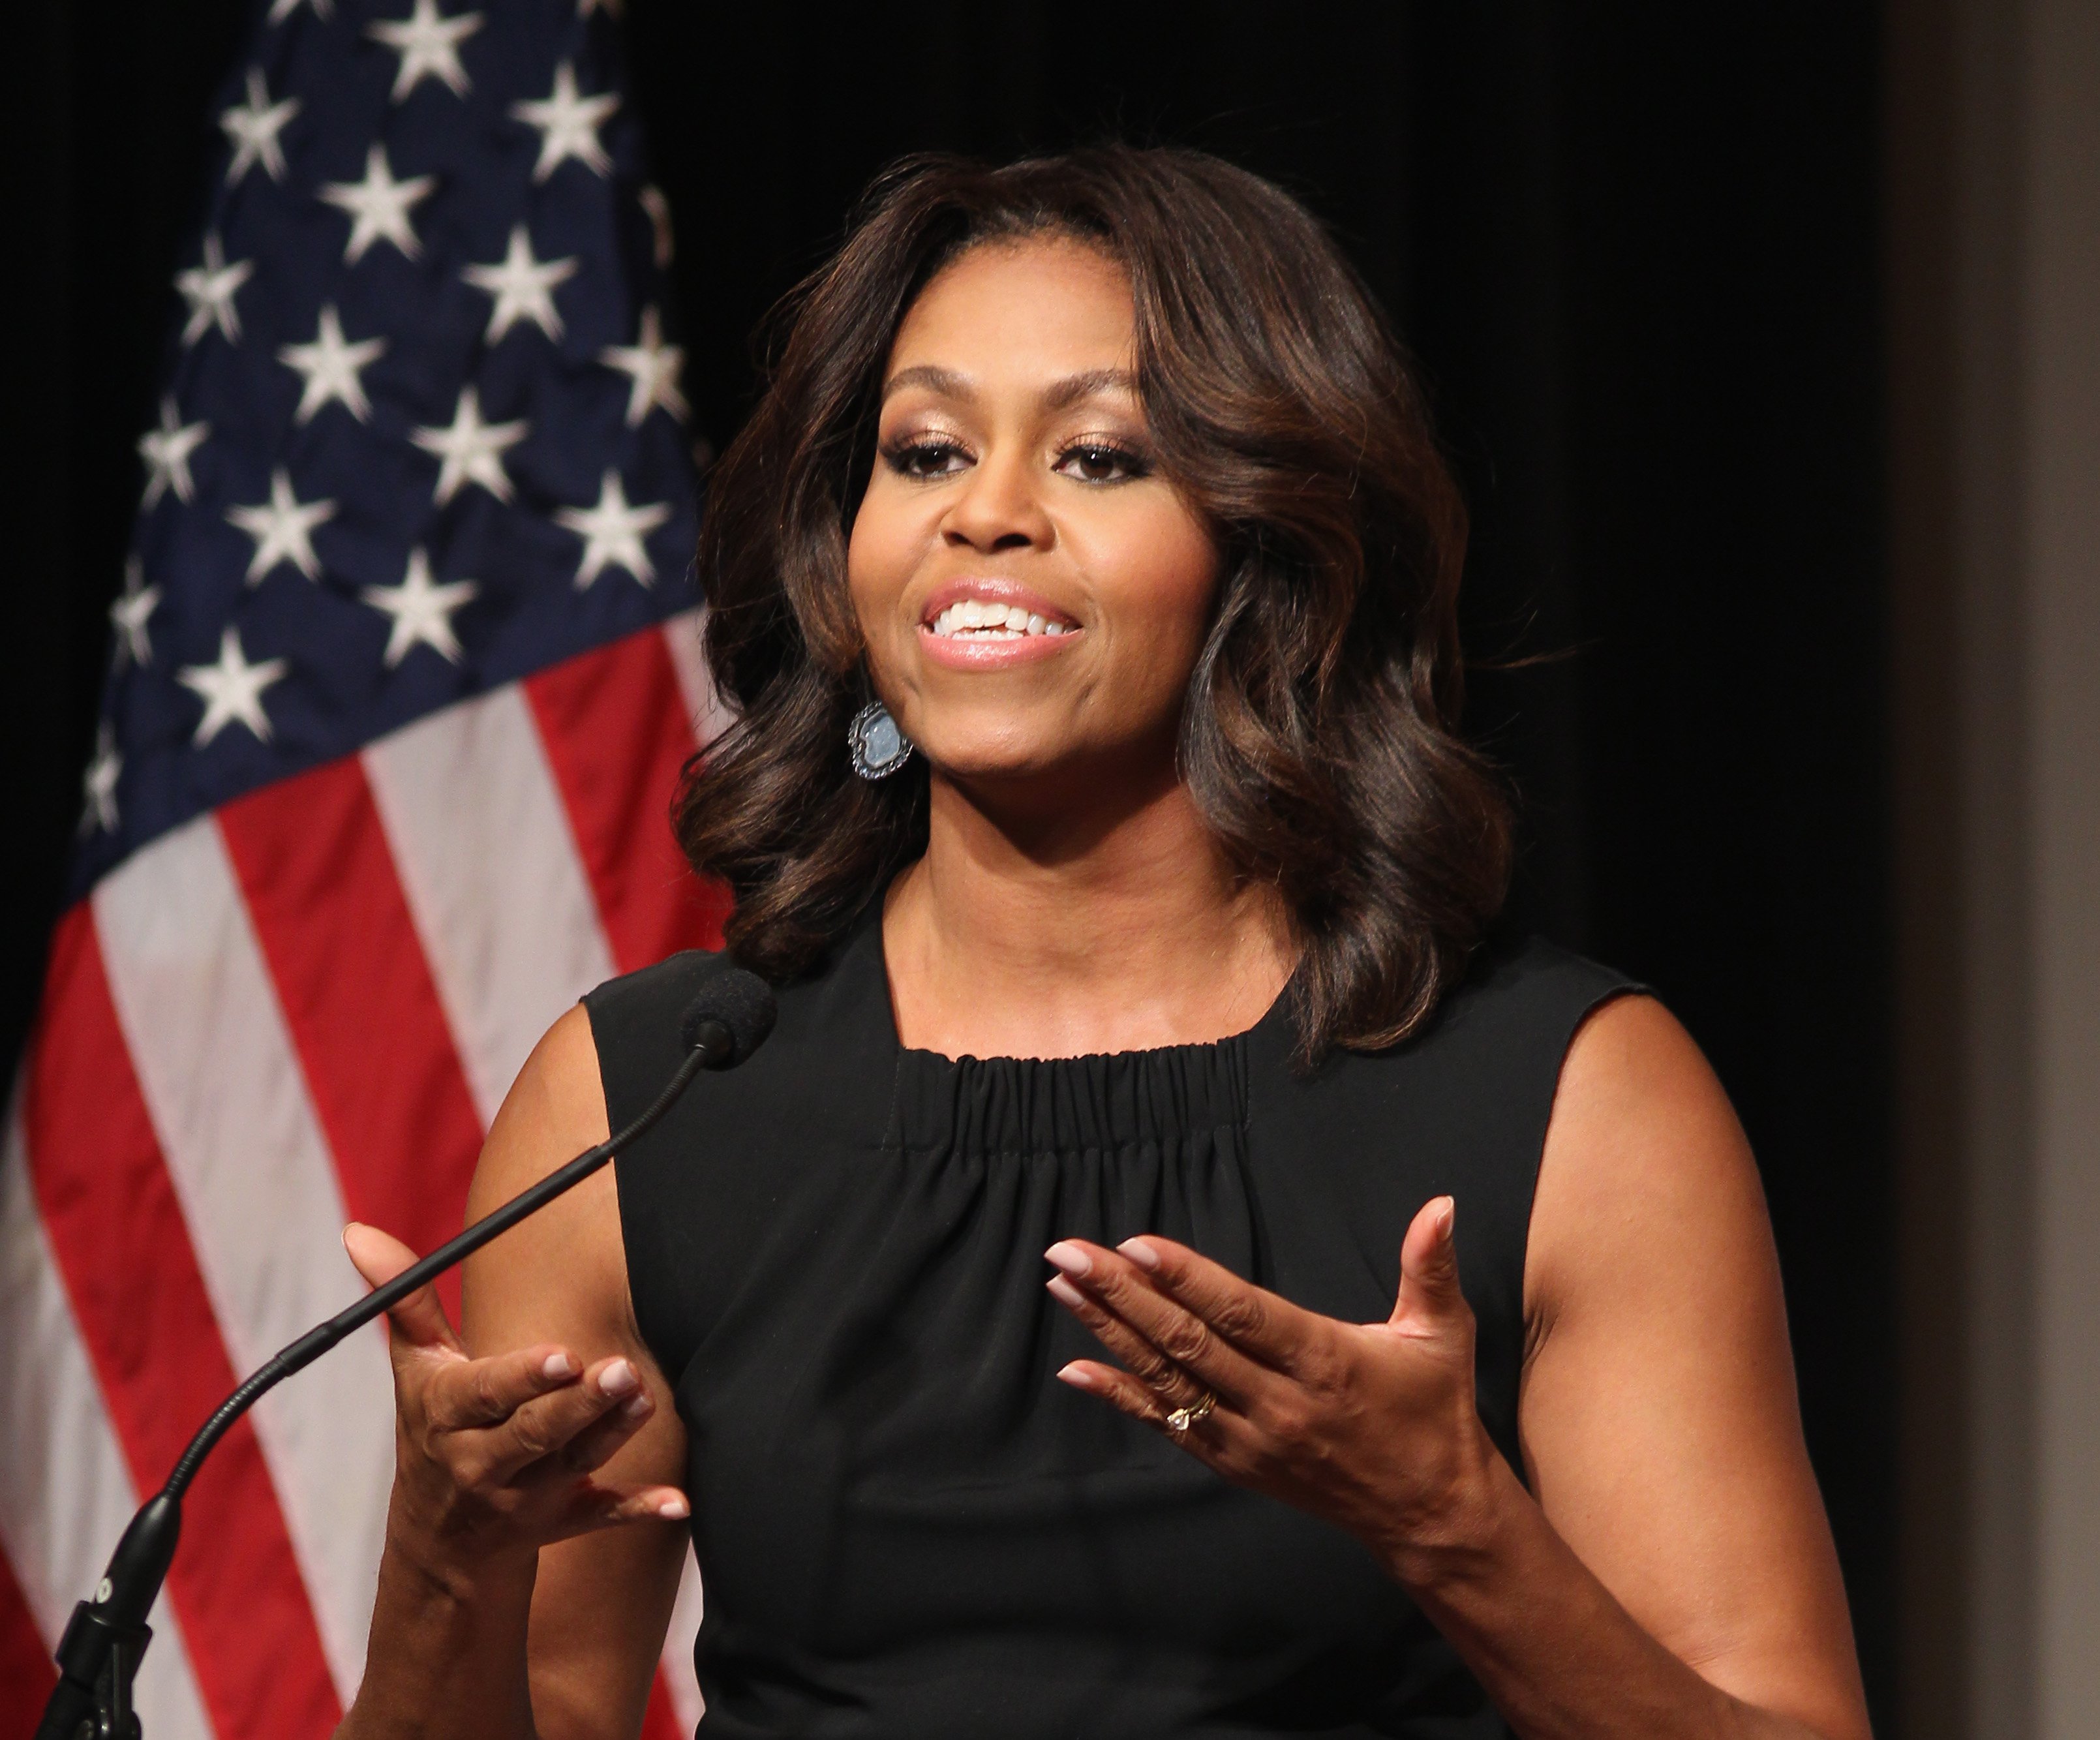 Michelle Obama at the Women in Military Service for America Memorial on Nov. 10, 2014 in Virginia | Photo: Getty Images